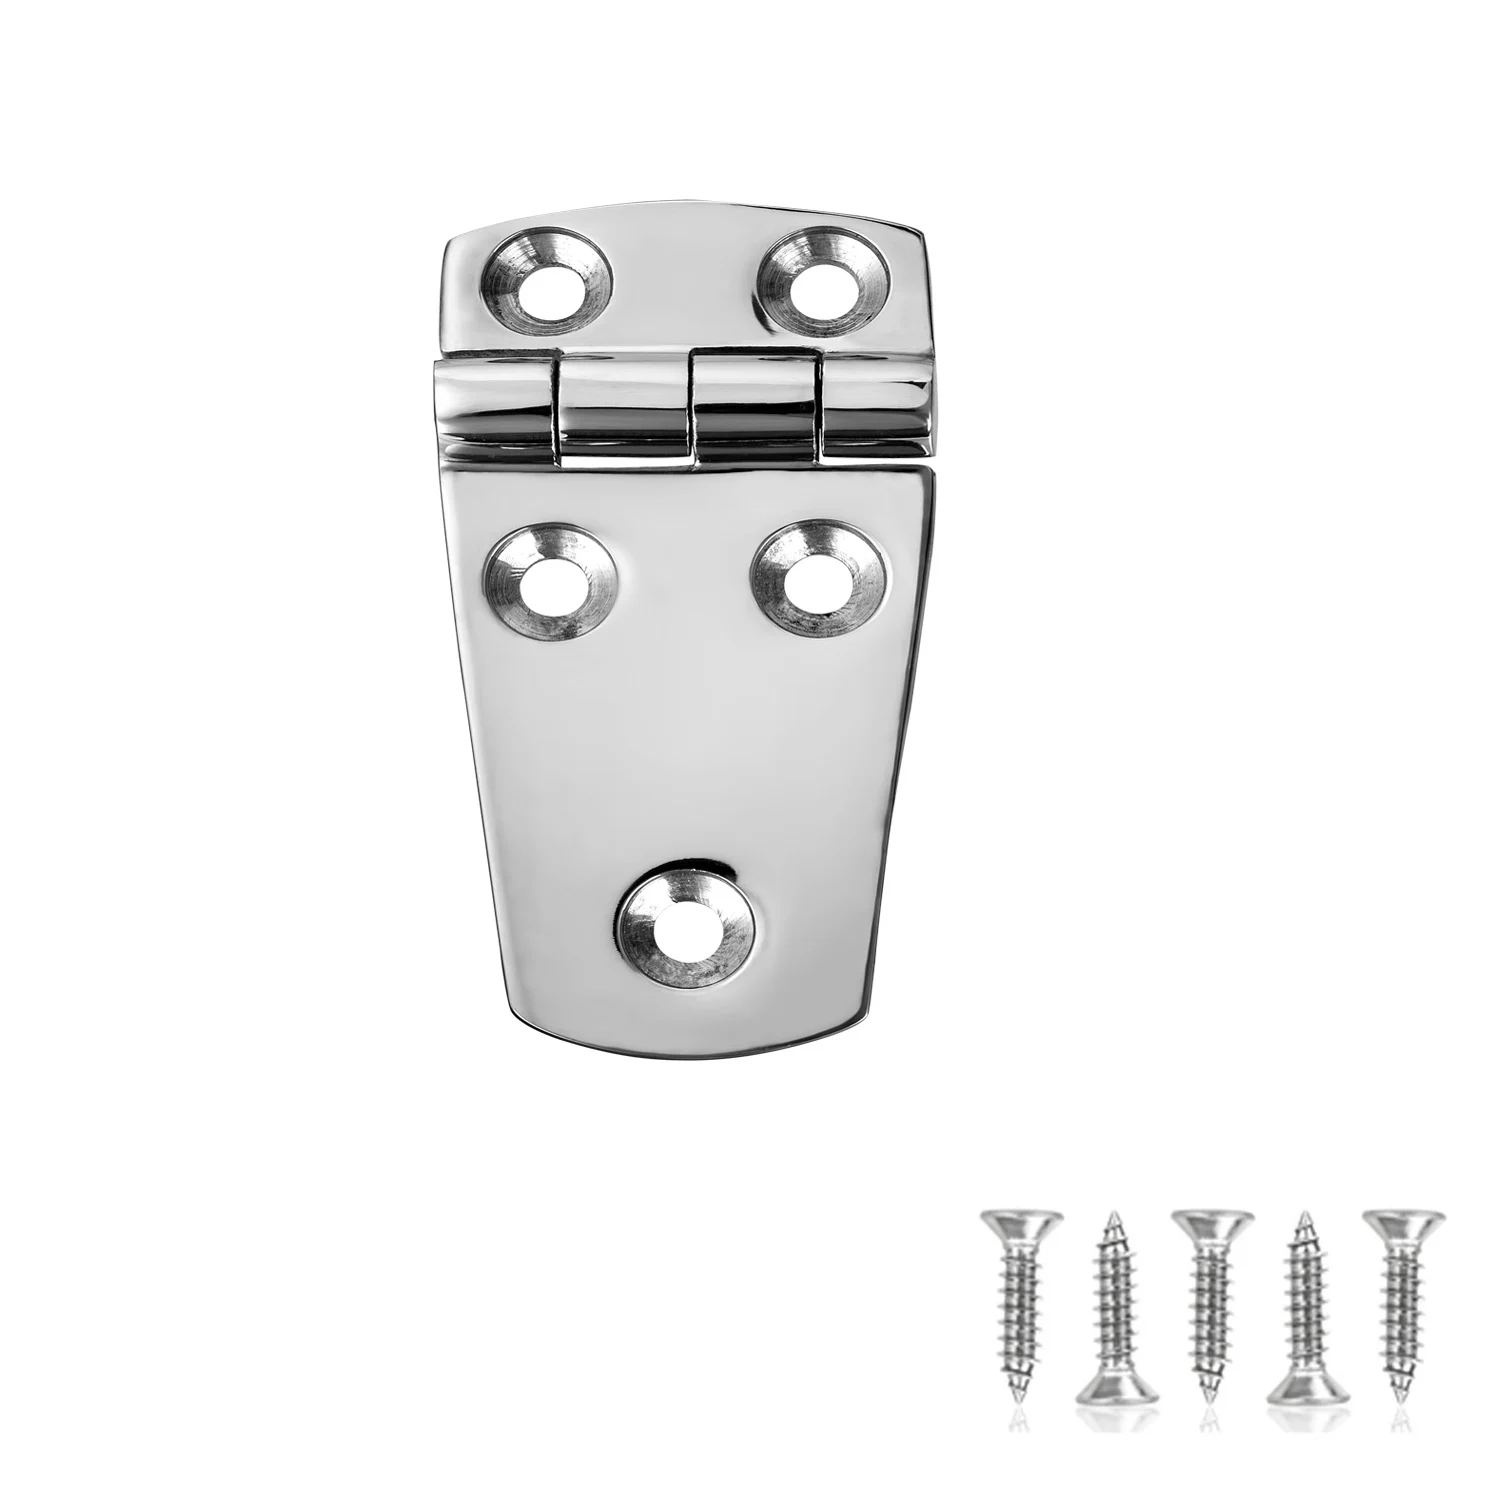 Marine Boat Hatch Hinges Stainless Steel, 3 Inch X 1.5 Inches(76 X 38MM) 5 Holes, No Noise, Heavy Duty 316 Ss with Screws heavy duty t hinges boat hinges 4 inch stainless steel marine hinges 316 ss with screws 2 pcs